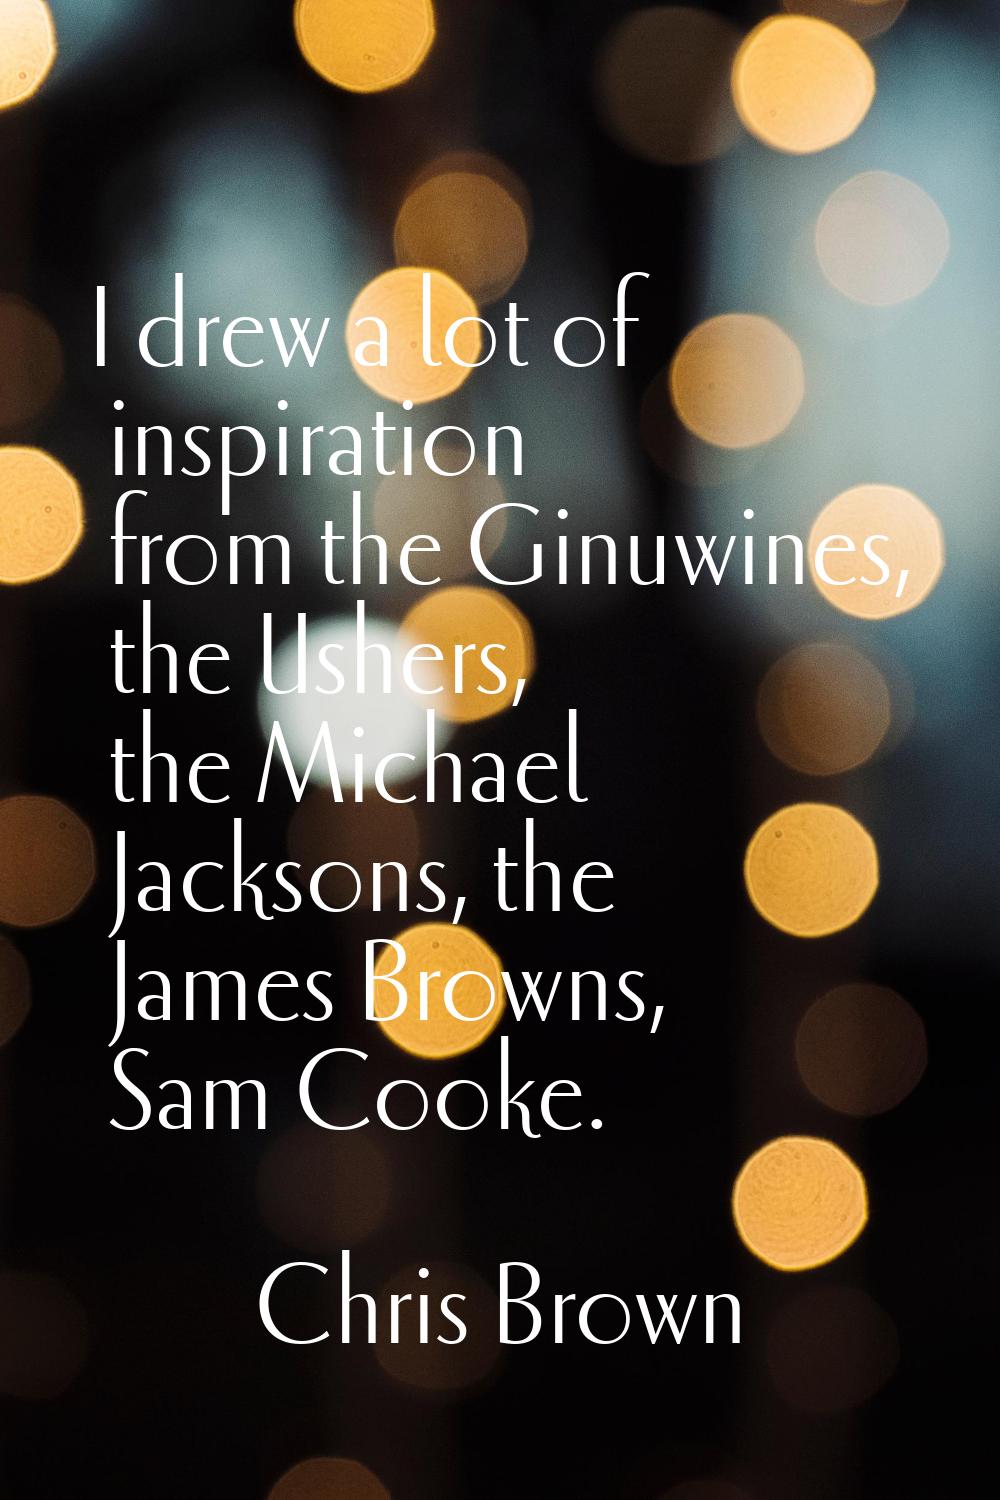 I drew a lot of inspiration from the Ginuwines, the Ushers, the Michael Jacksons, the James Browns,